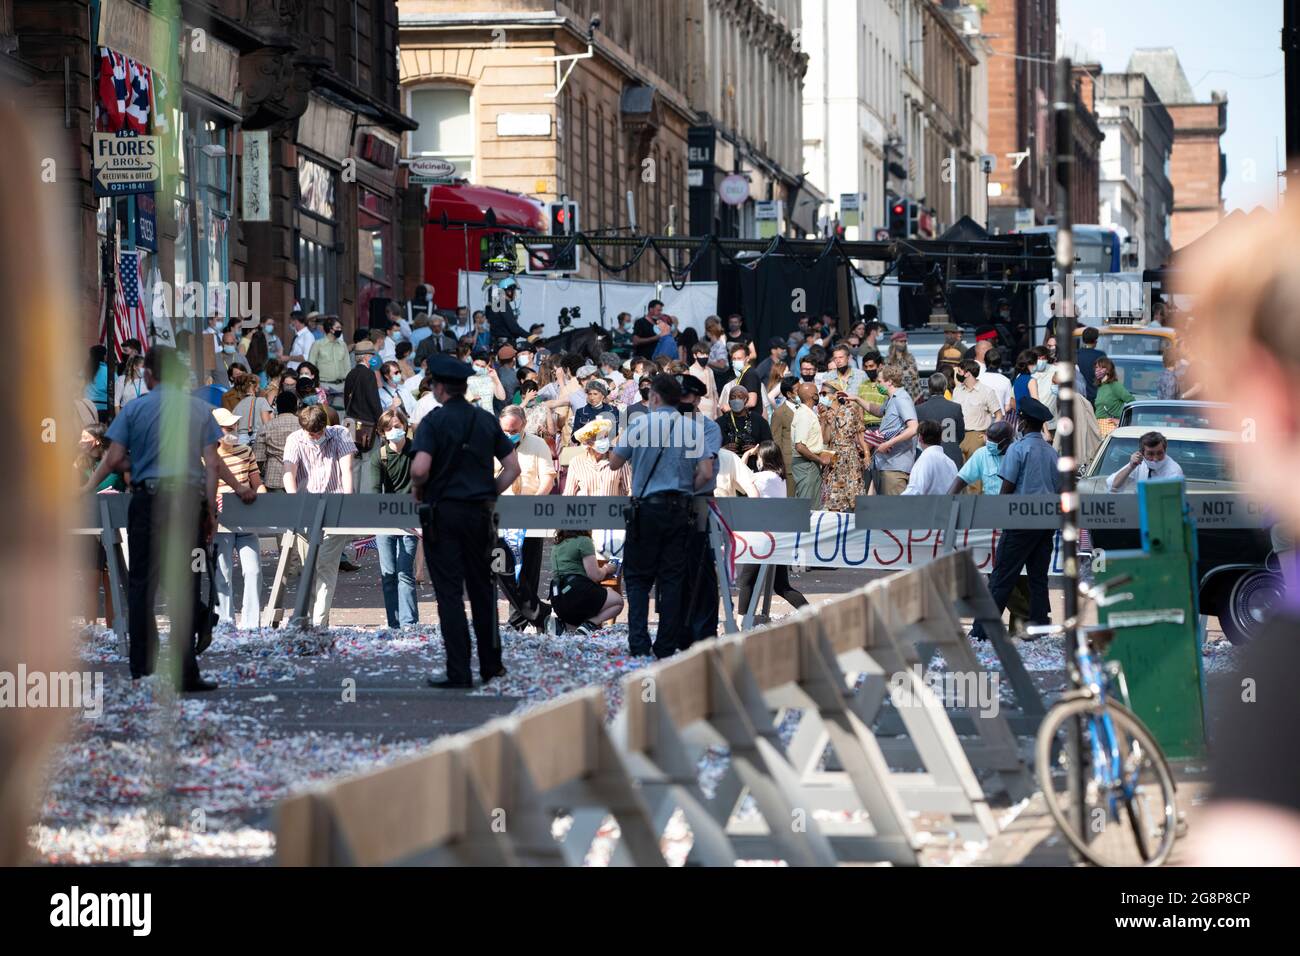 Glasgow, Scotland, UK. 21 July 2021.  PICTURED: The angry crowd/mob film scene which is in between takes in the side streets of Glasgow. Filming on the set of Indiana Jones 5 in the middle of Glasgow city centre as the Hollywood blockbuster sets up Glasgow as New York City. A full production can be seen, with a large cast, producers and extras. The city centre has been changed so that all the shop fronts and building look like 1959 America. Credit: Colin Fisher Stock Photo